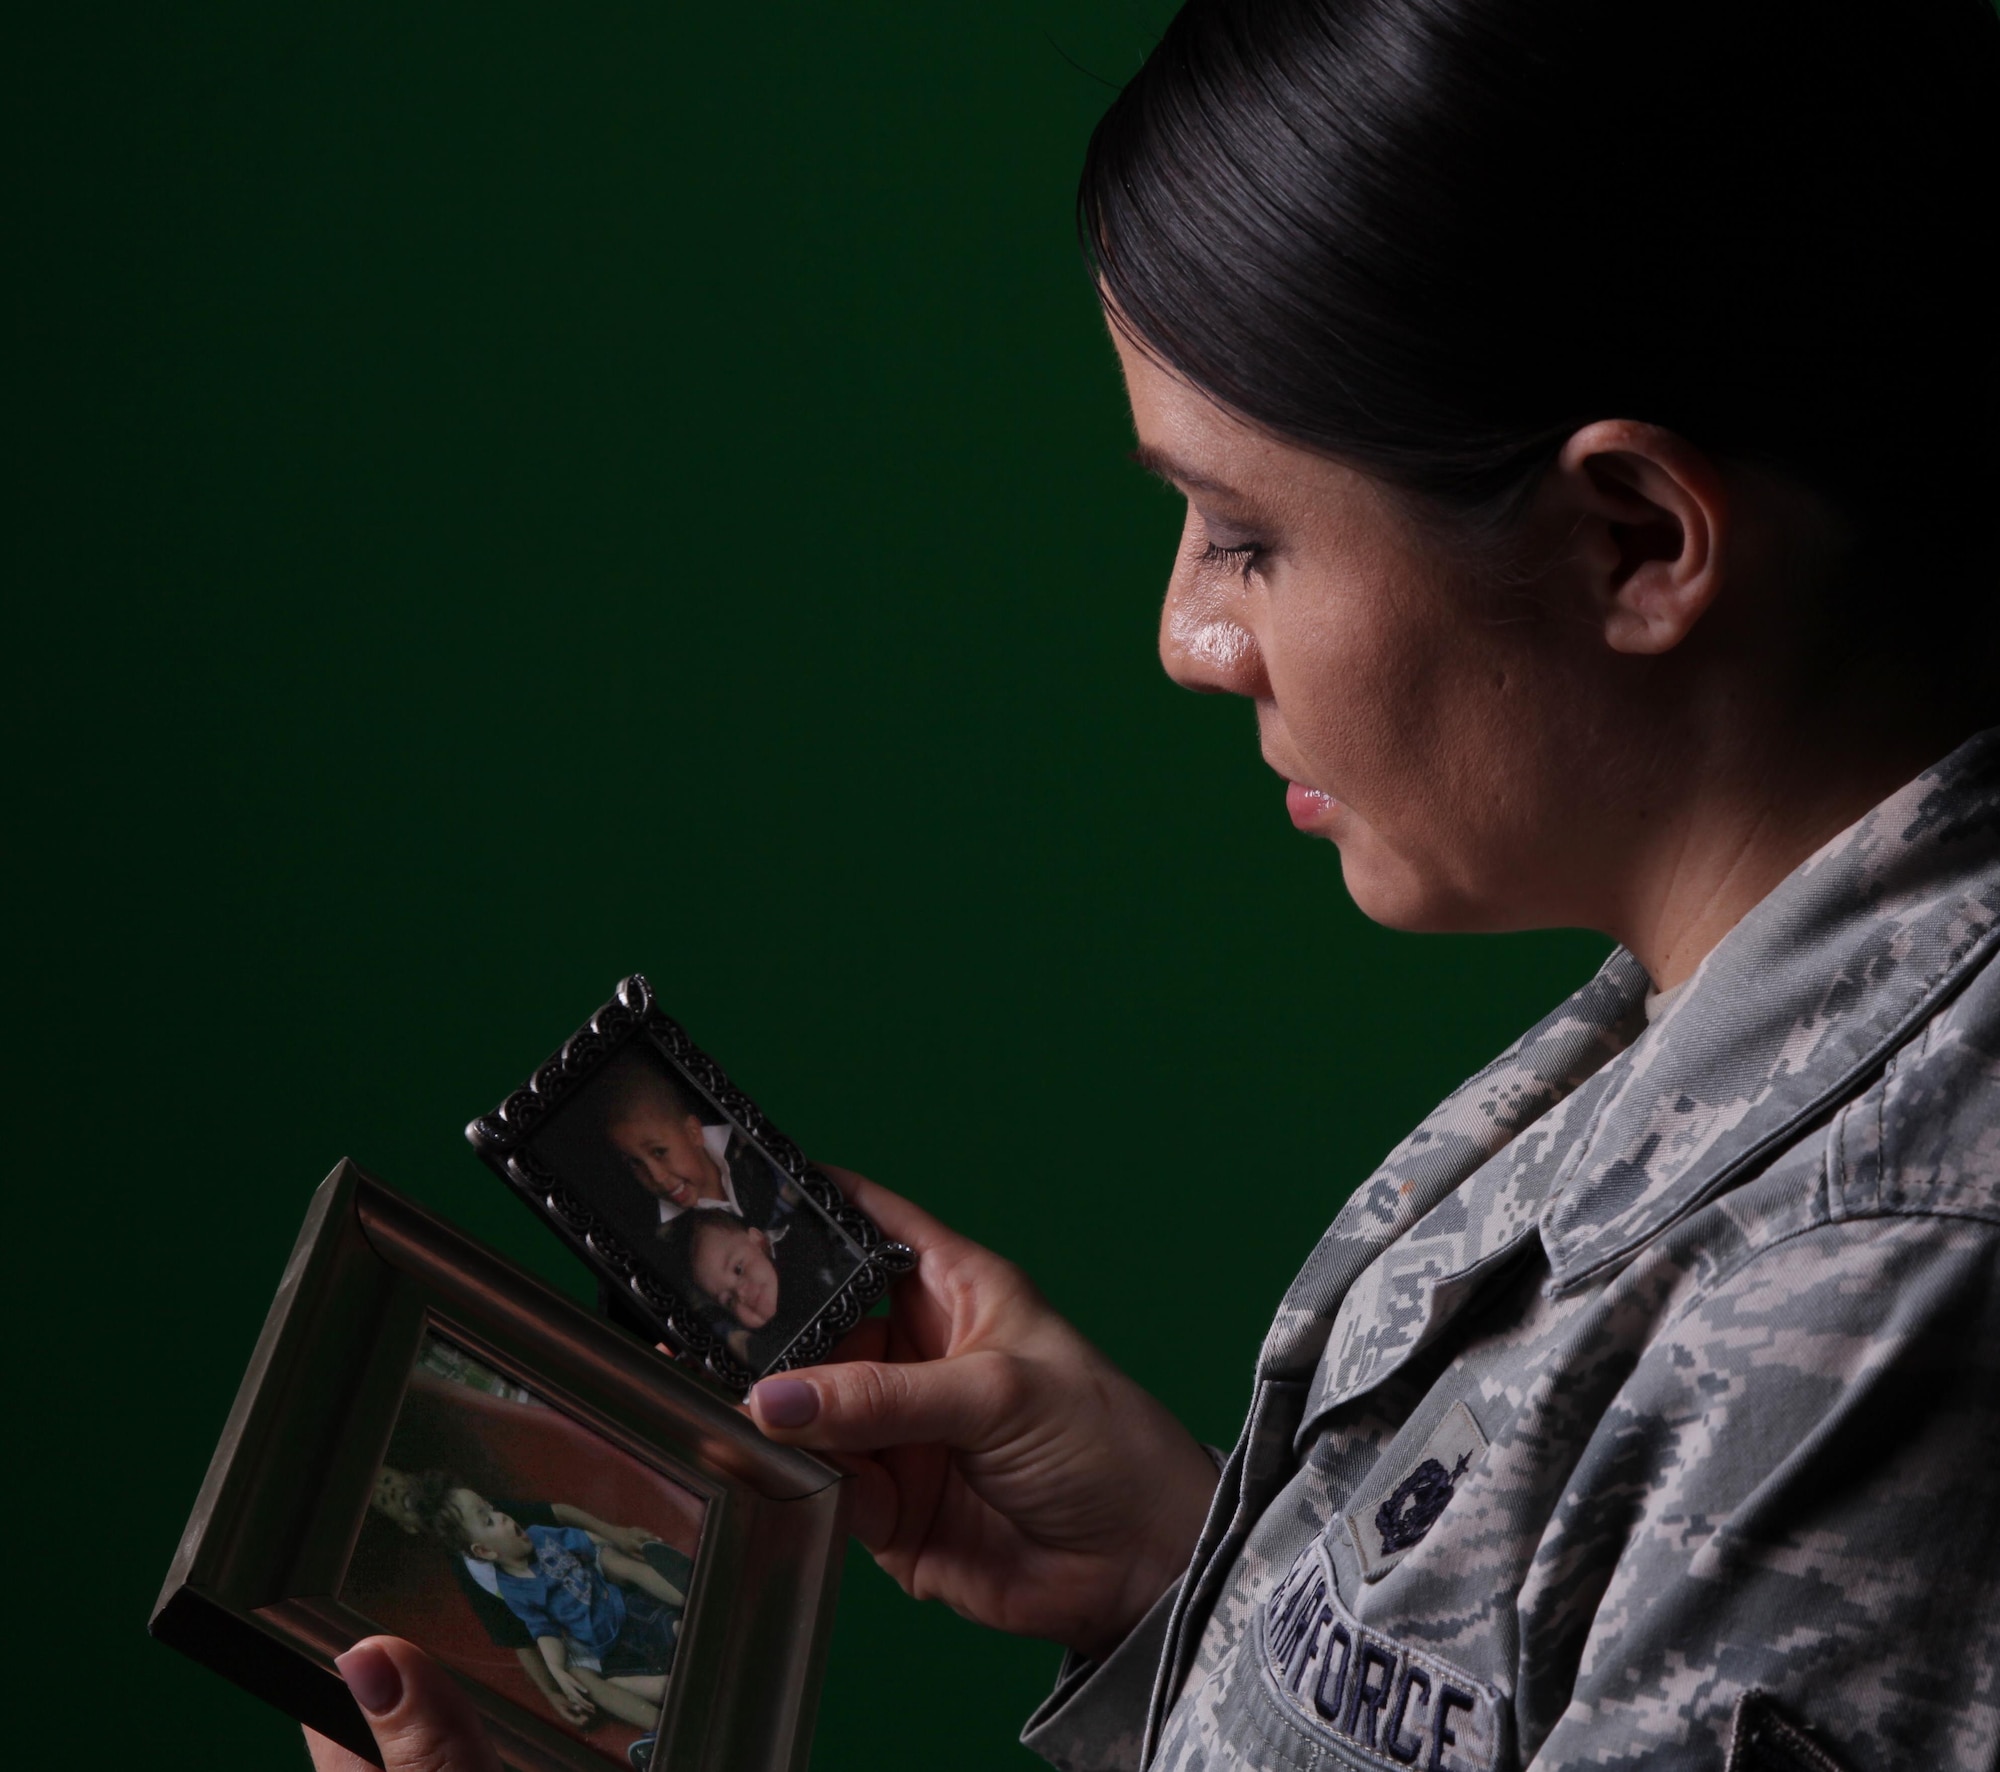 Tech. Sgt. Amee Espinoza, Personnel Customer Service Manager for the ARPC Total Force Service Center, looks at photos of her sons. Espinoza lost her youngest son, but turned the tragedy into therapy and found her calling to serve others through counseling. She completed more than 600 hours of direct and indirect counseling services with individuals and groups focused on DUI and DWIs, addiction, domestic violence, conflict resolution, and anger management and was chosen as the Air Force Reserve Command nomination for the 2016 GEICO Military Service Award. (U.S. Air Force photo by Quinn Jacobson)